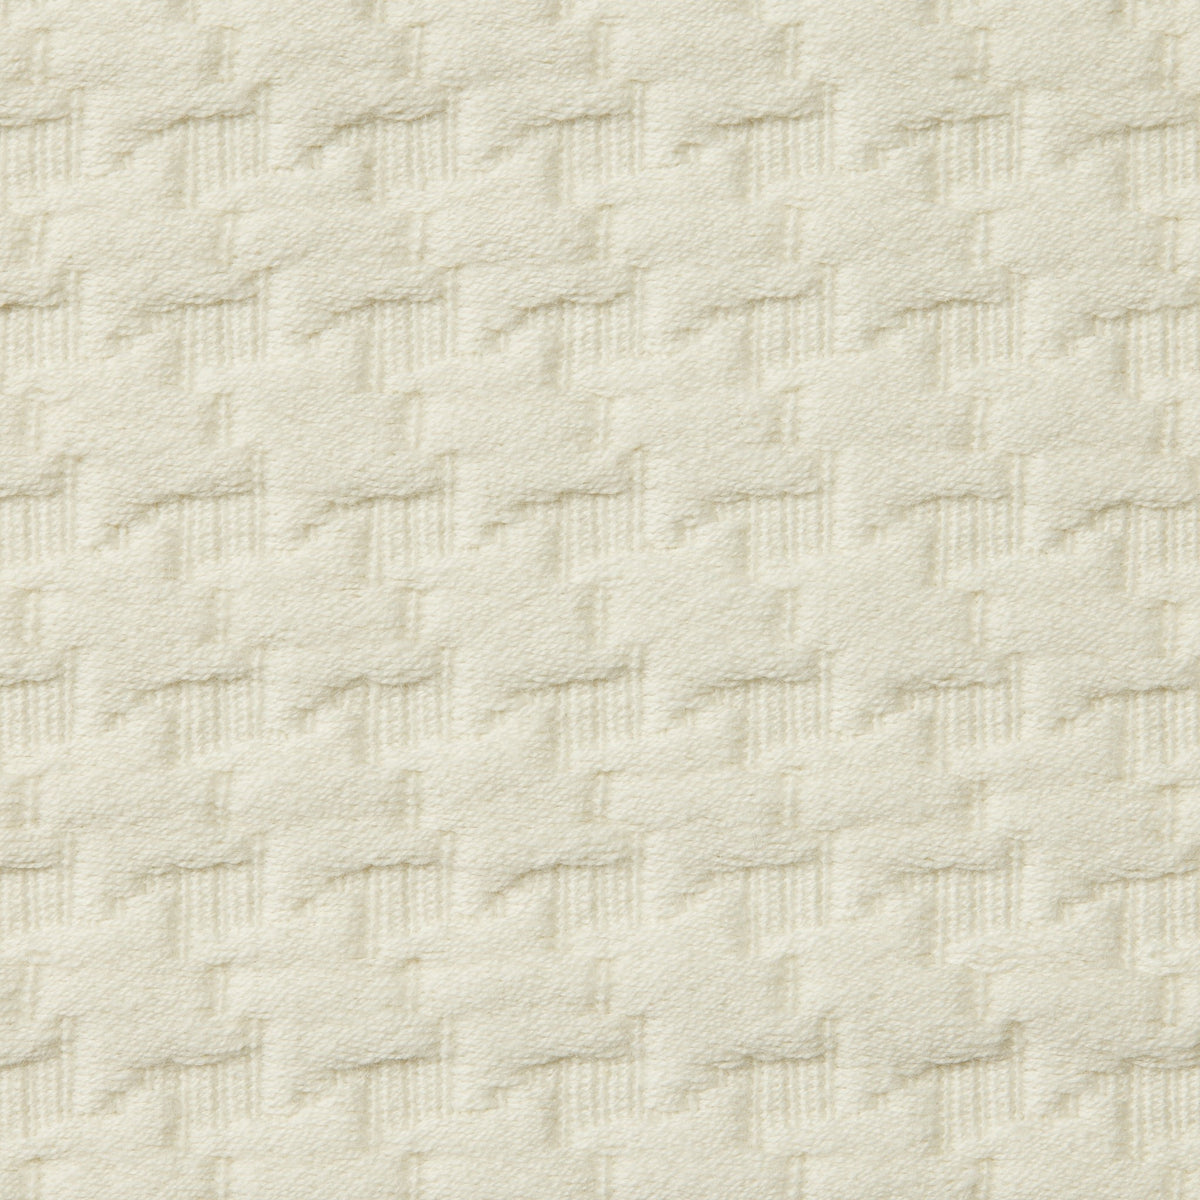 Swatch Sample of Sferra Hatteras Coverlet and Shams Ivory